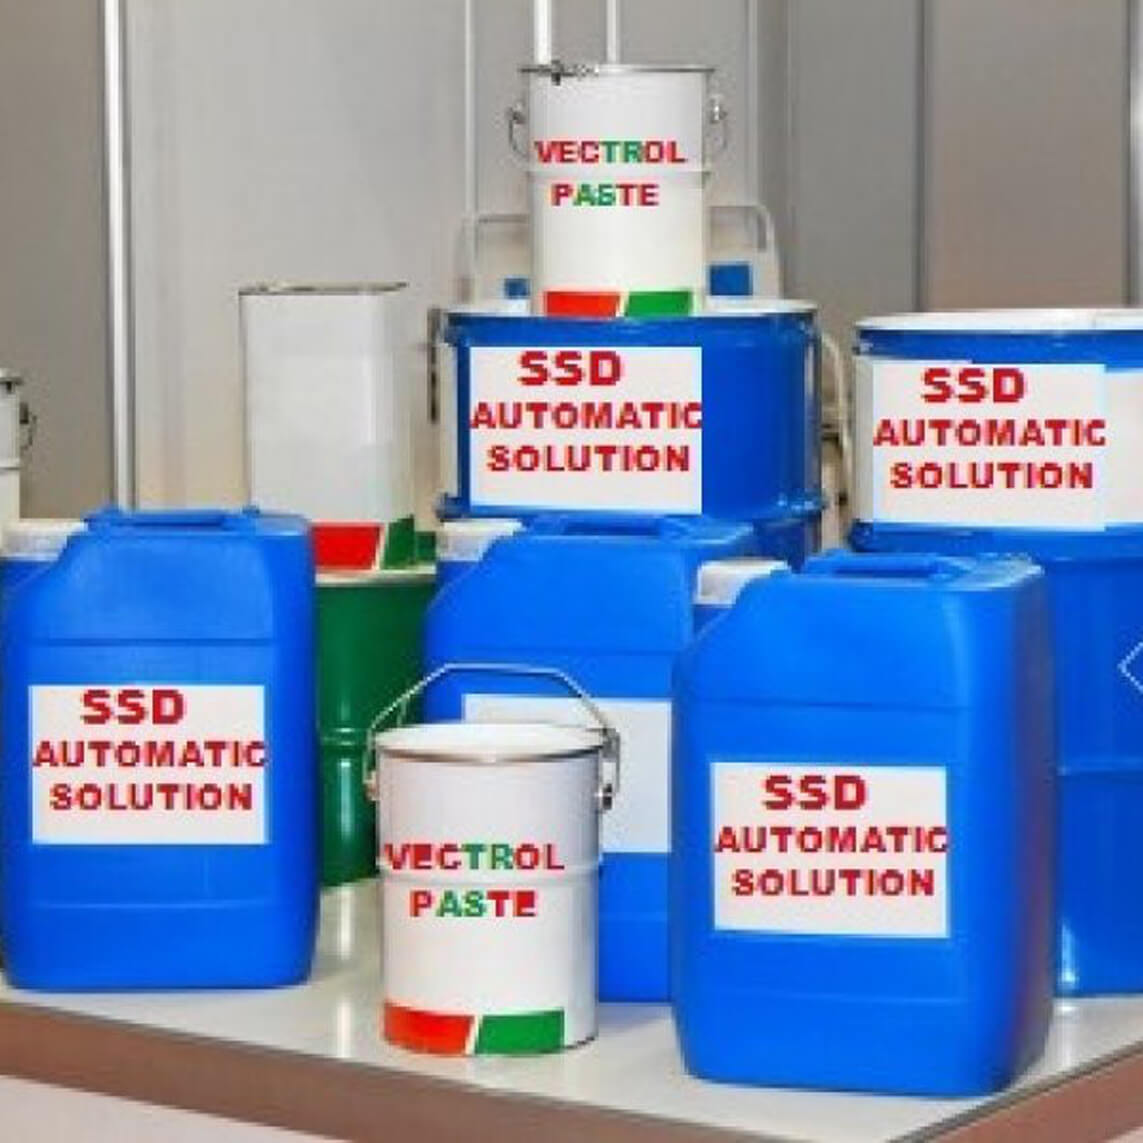 SSD CHEMICAL FOR SALE!ServicesEverything ElseAll Indiaother